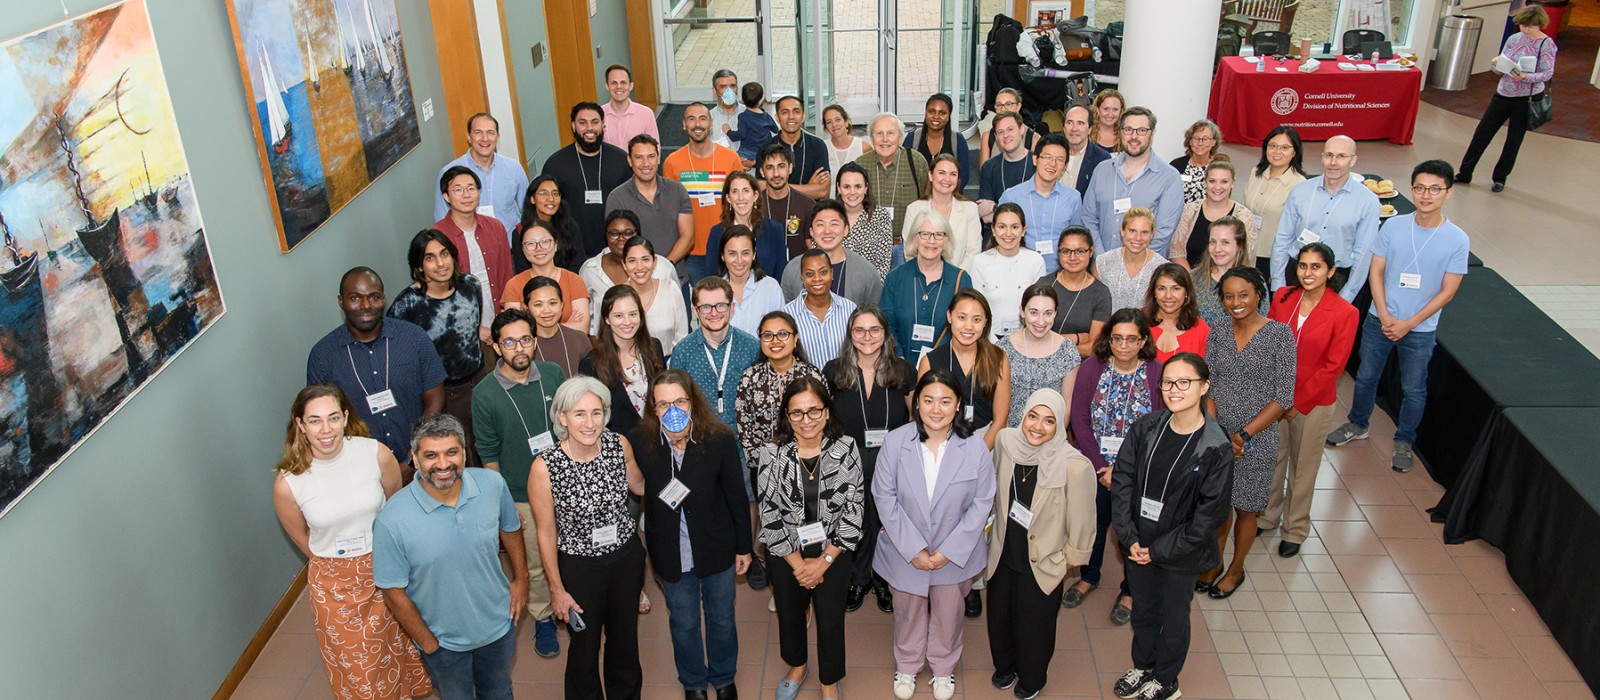 Group photo of the attendees at the intercampus symposium on metabolic health